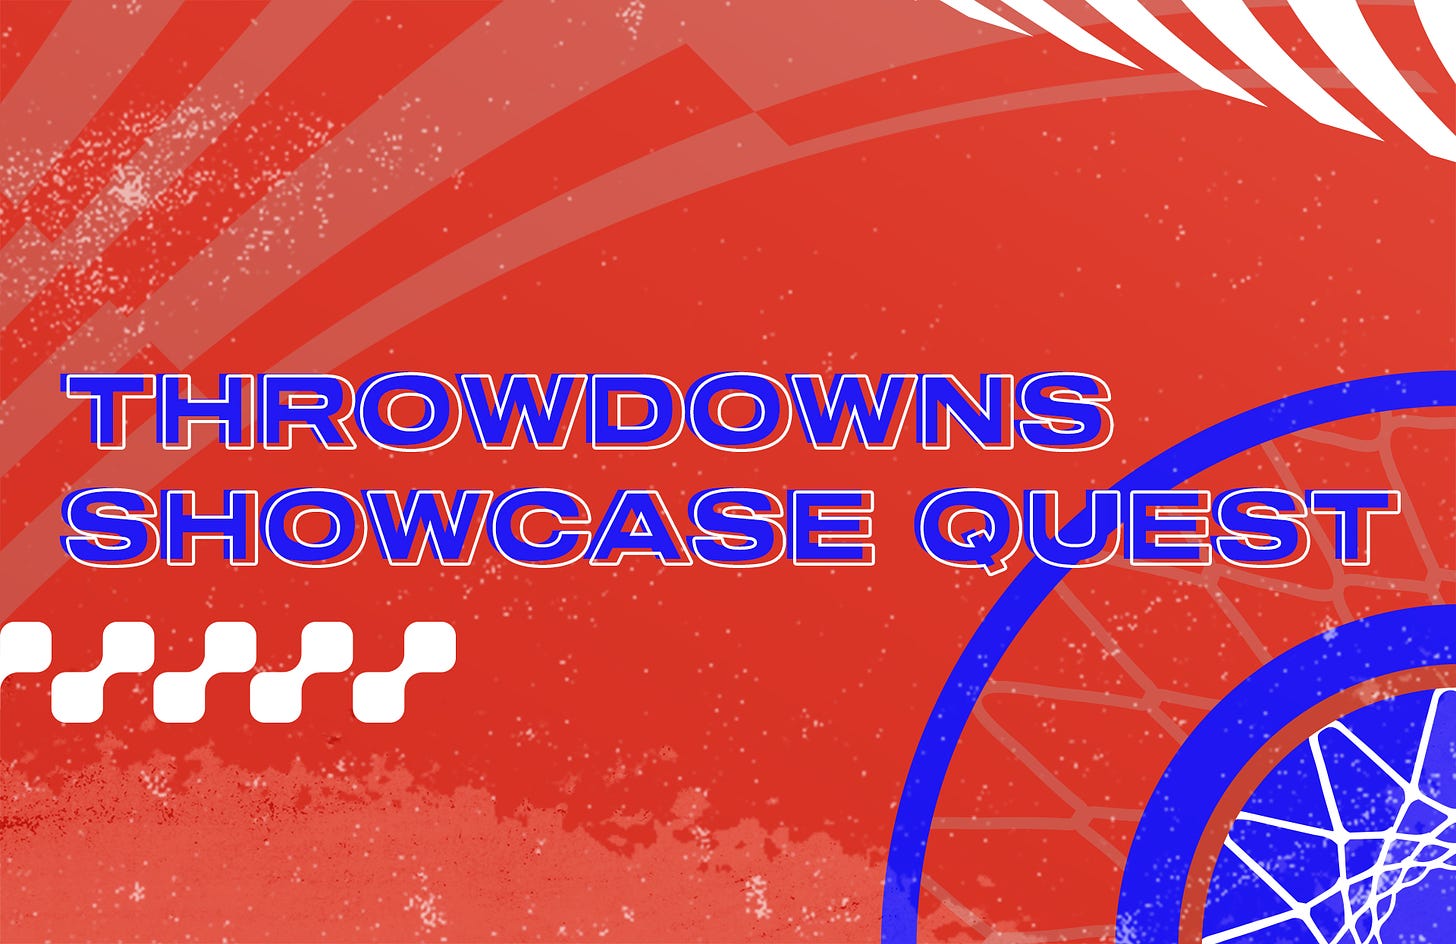 We have a new Showcase Quest featuring a never-to-be-sold-in-packs rare Moment from one of the league's stars.